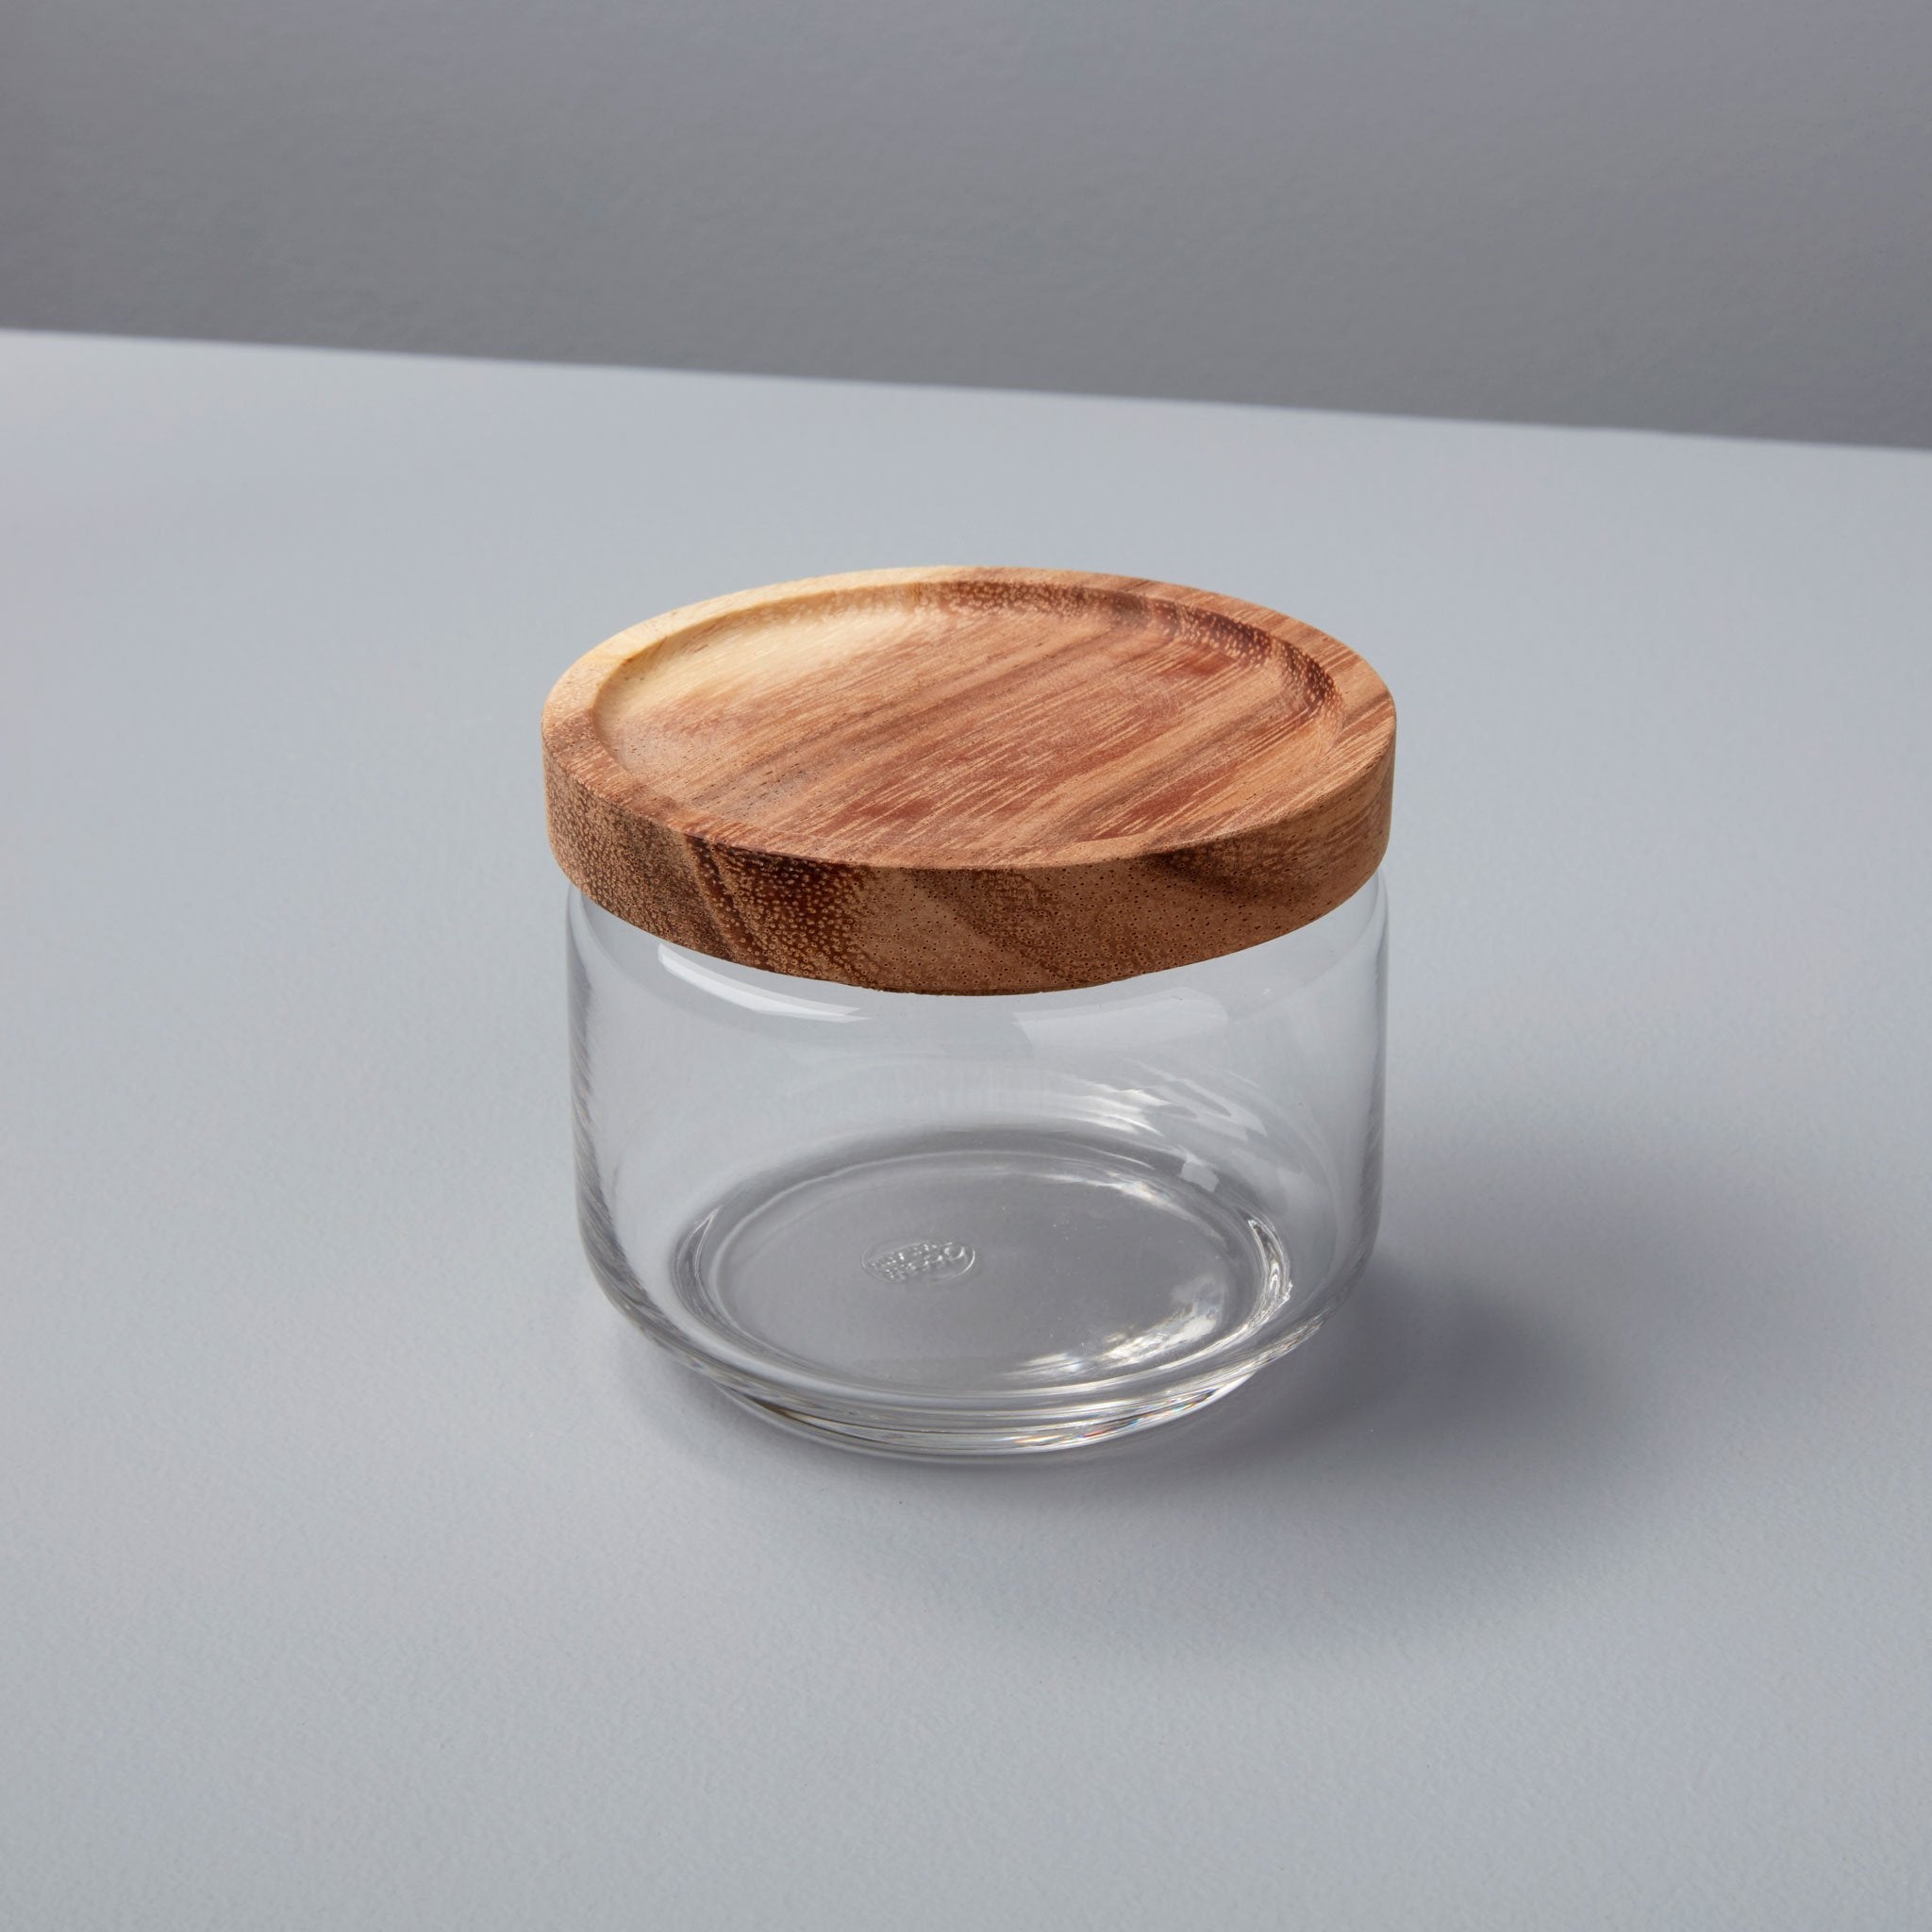 https://behome.com/cdn/shop/products/Be-Home_Glass-Container-with-Acacia-Lid-Small_41-592_886c2772-5bc7-4cd1-bdf1-6c5e7733d3d5.jpg?v=1669237704&width=3840